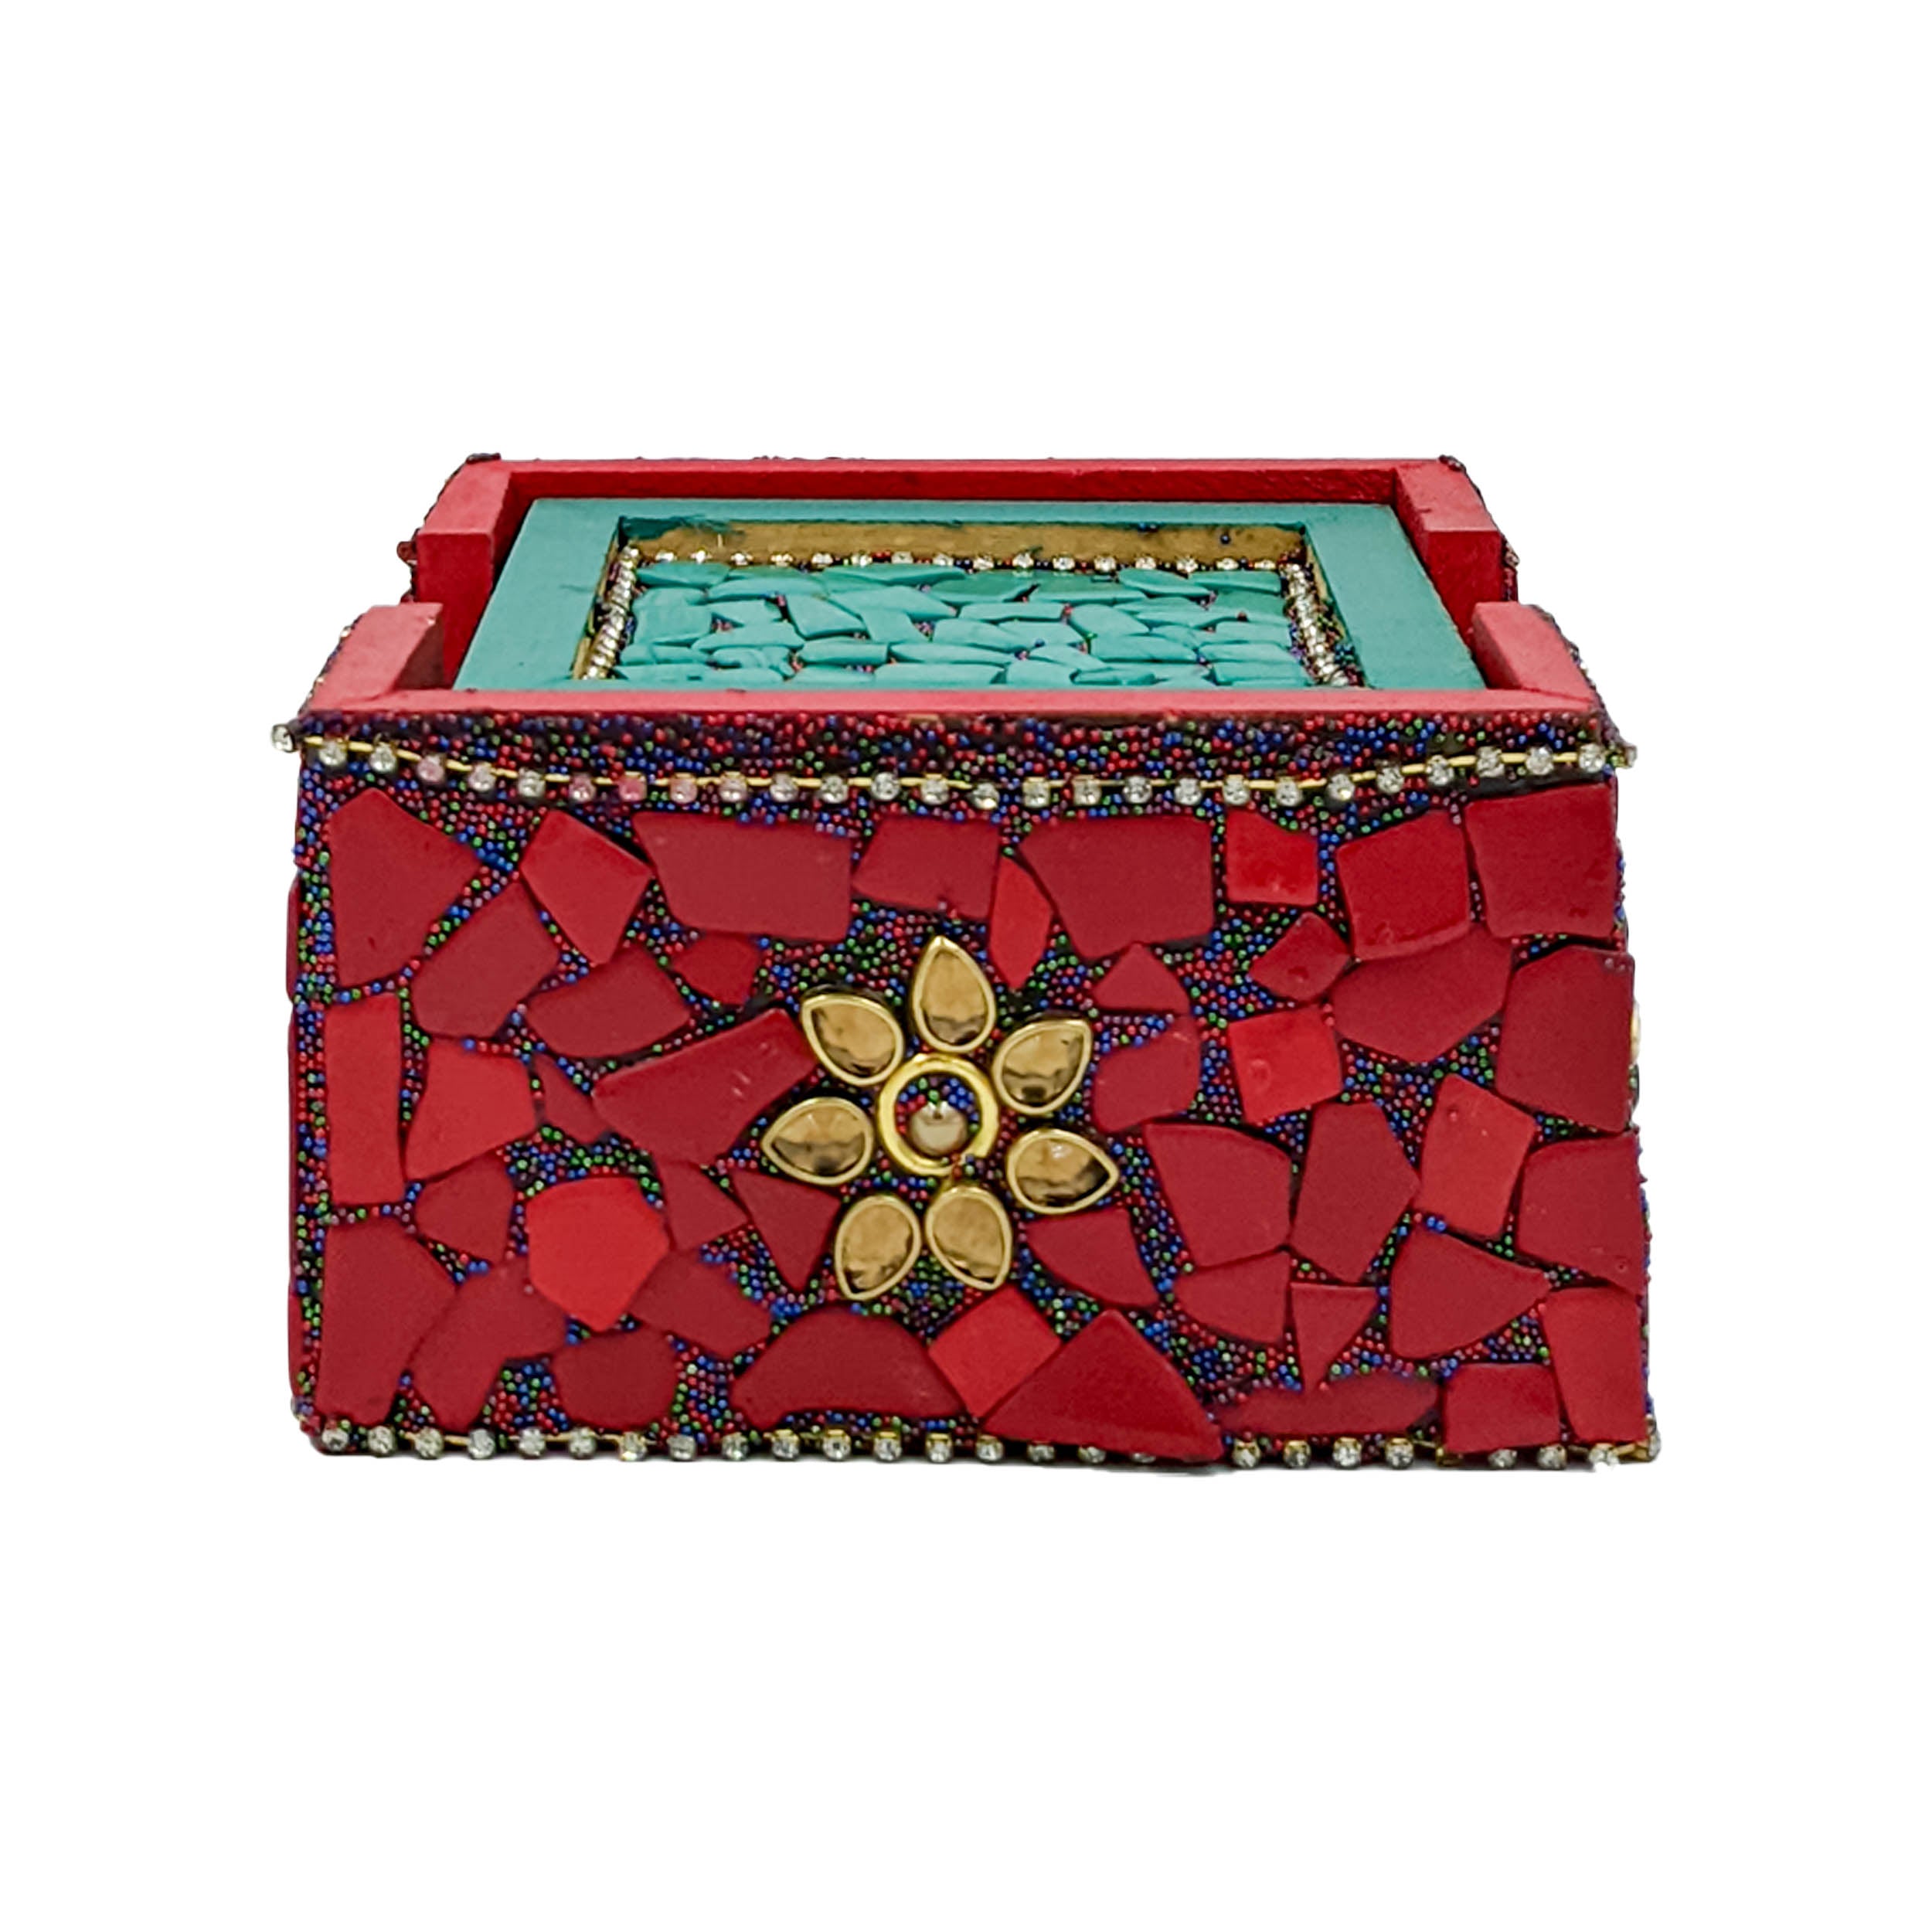 Protect Your Furniture in Style with Handcrafted Wooden Stone Painted Design Tea & Coffee Coasters